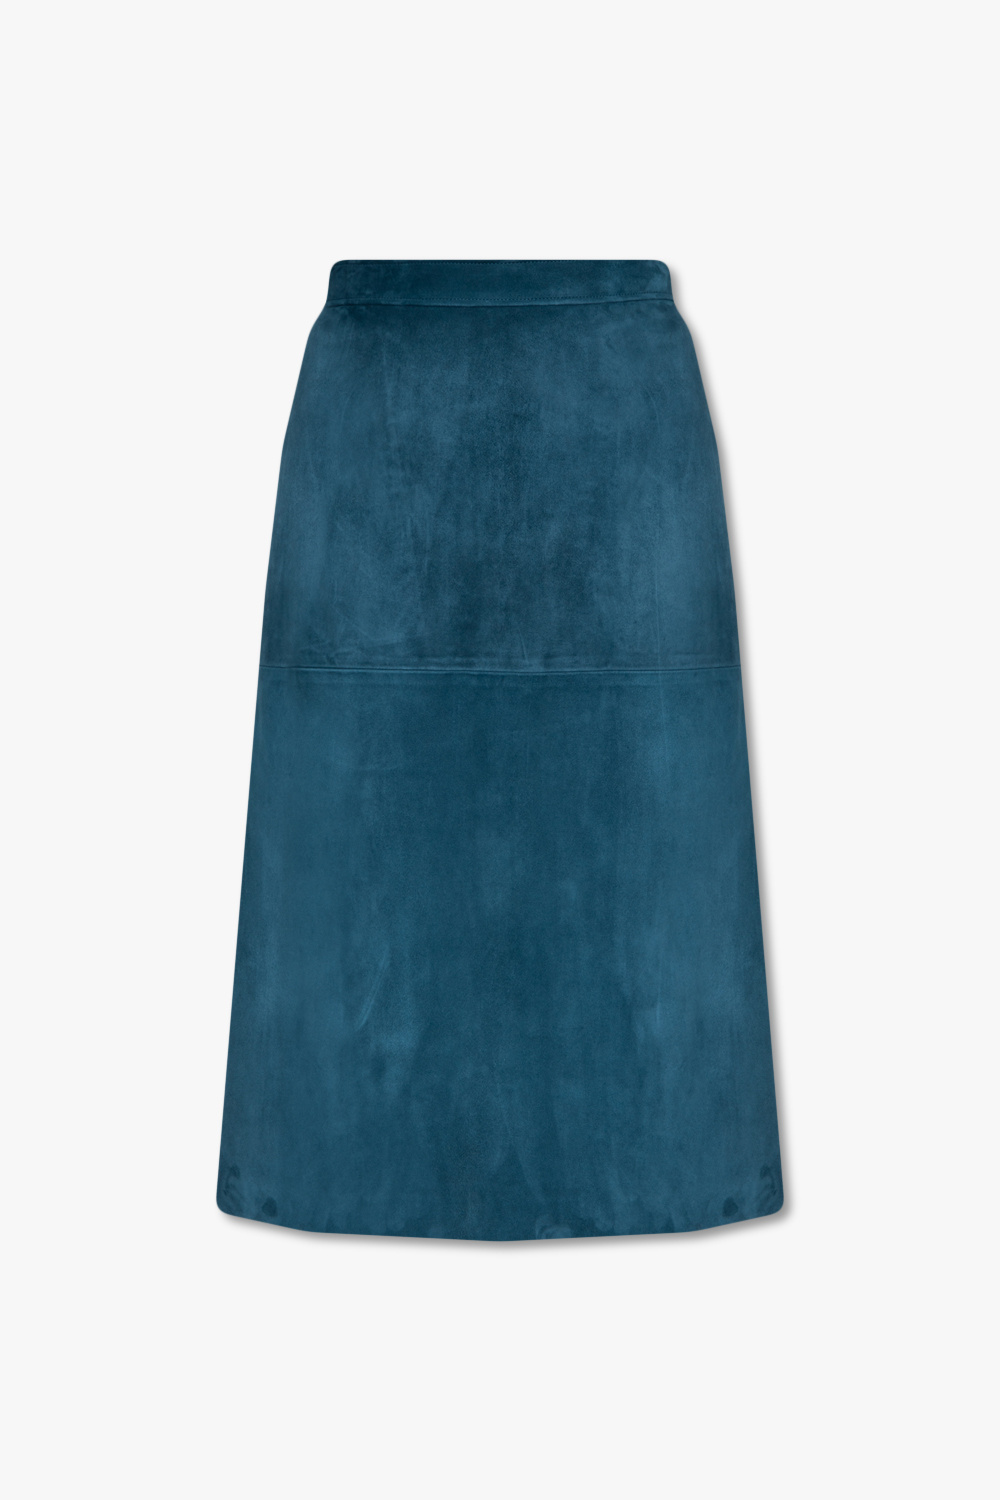 Gucci Suede skirt